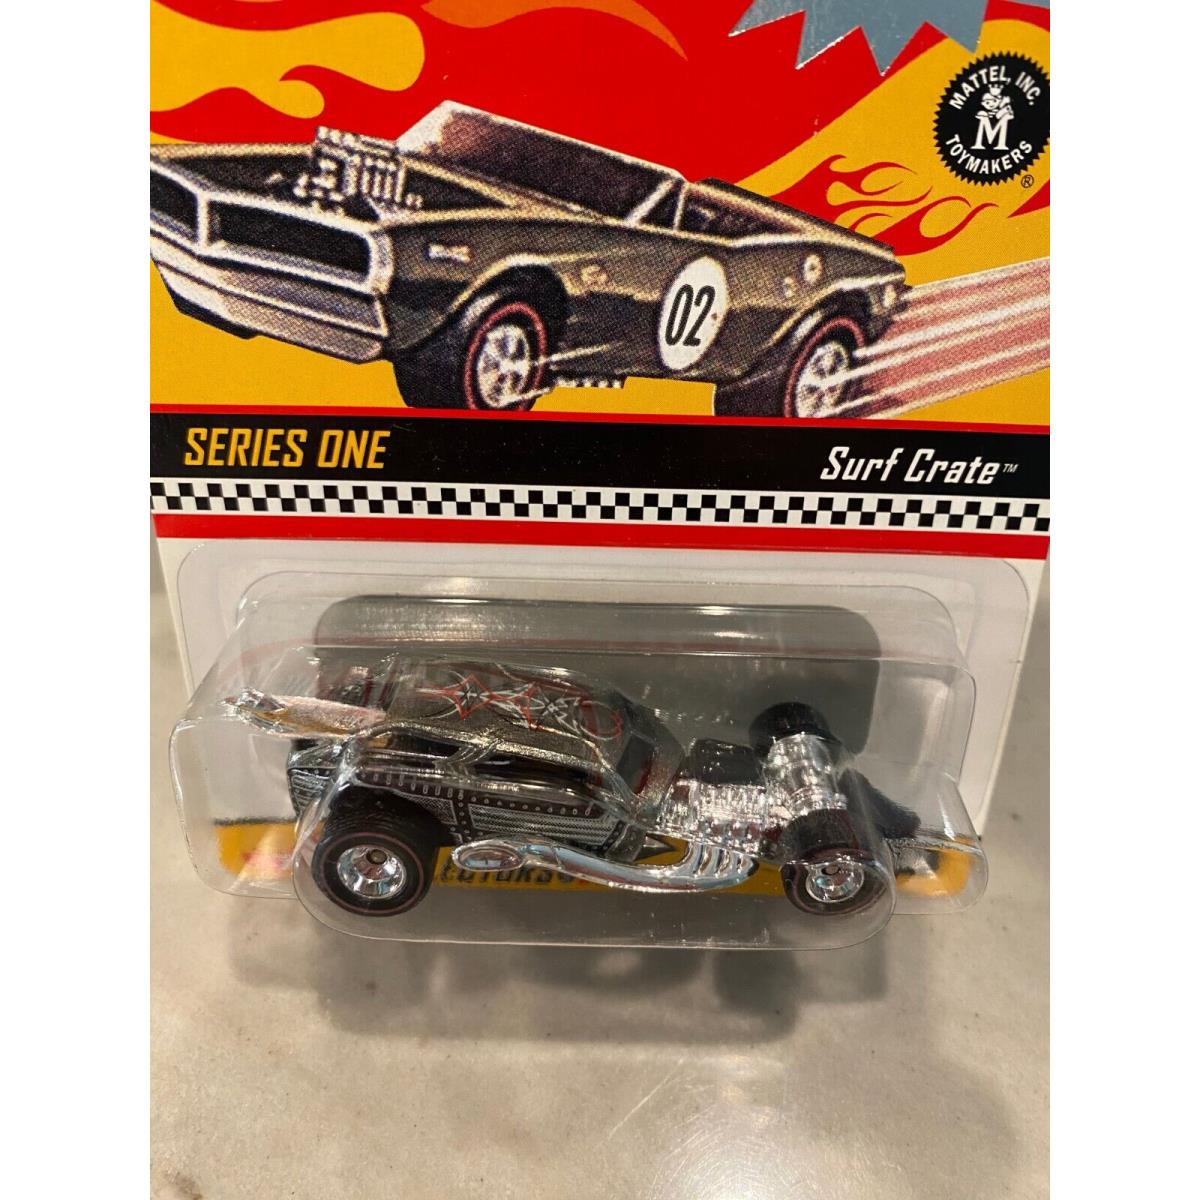 Hot Wheels Surf Crate Online Exclusive Series 1 Preproduction Exclusive 170